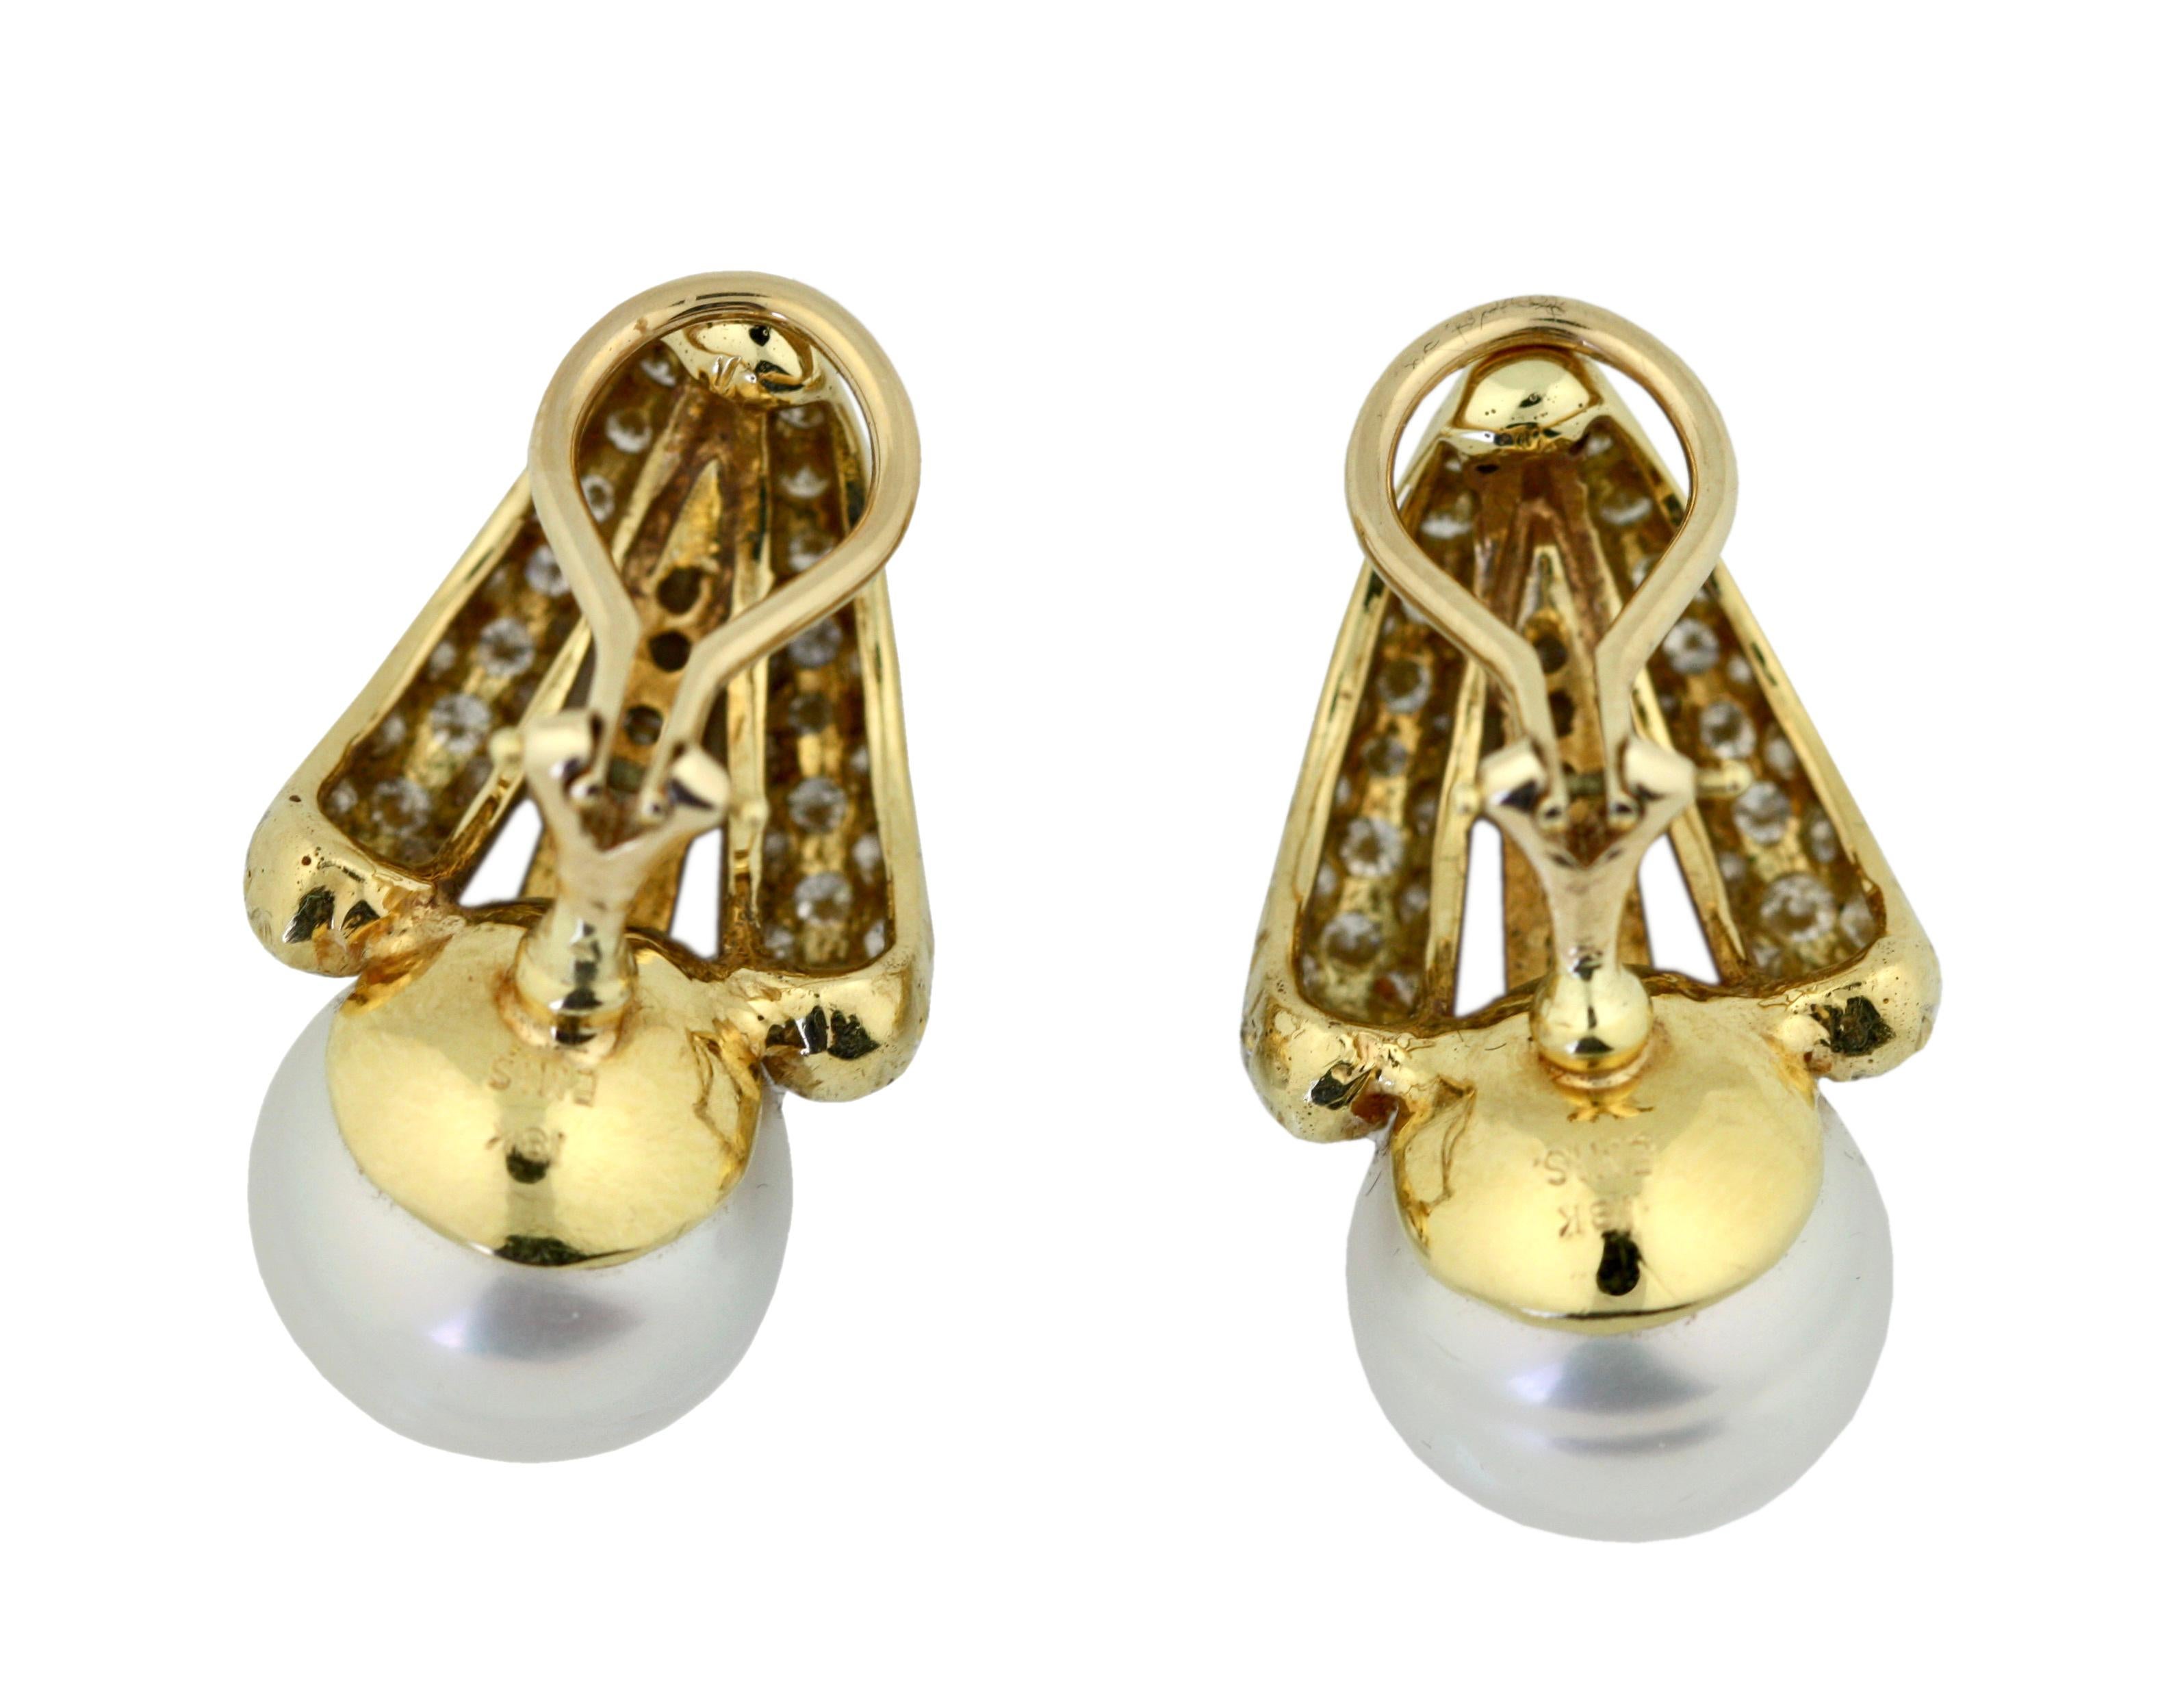 
Pair of 18 Karat yellow Gold, Cultured Pearl and Diamond Earclips, Emis
Topped by two round-shaped cultured pearls measuring approximately 13.5 by 13.5 mm, set with round diamonds, signed Emis.